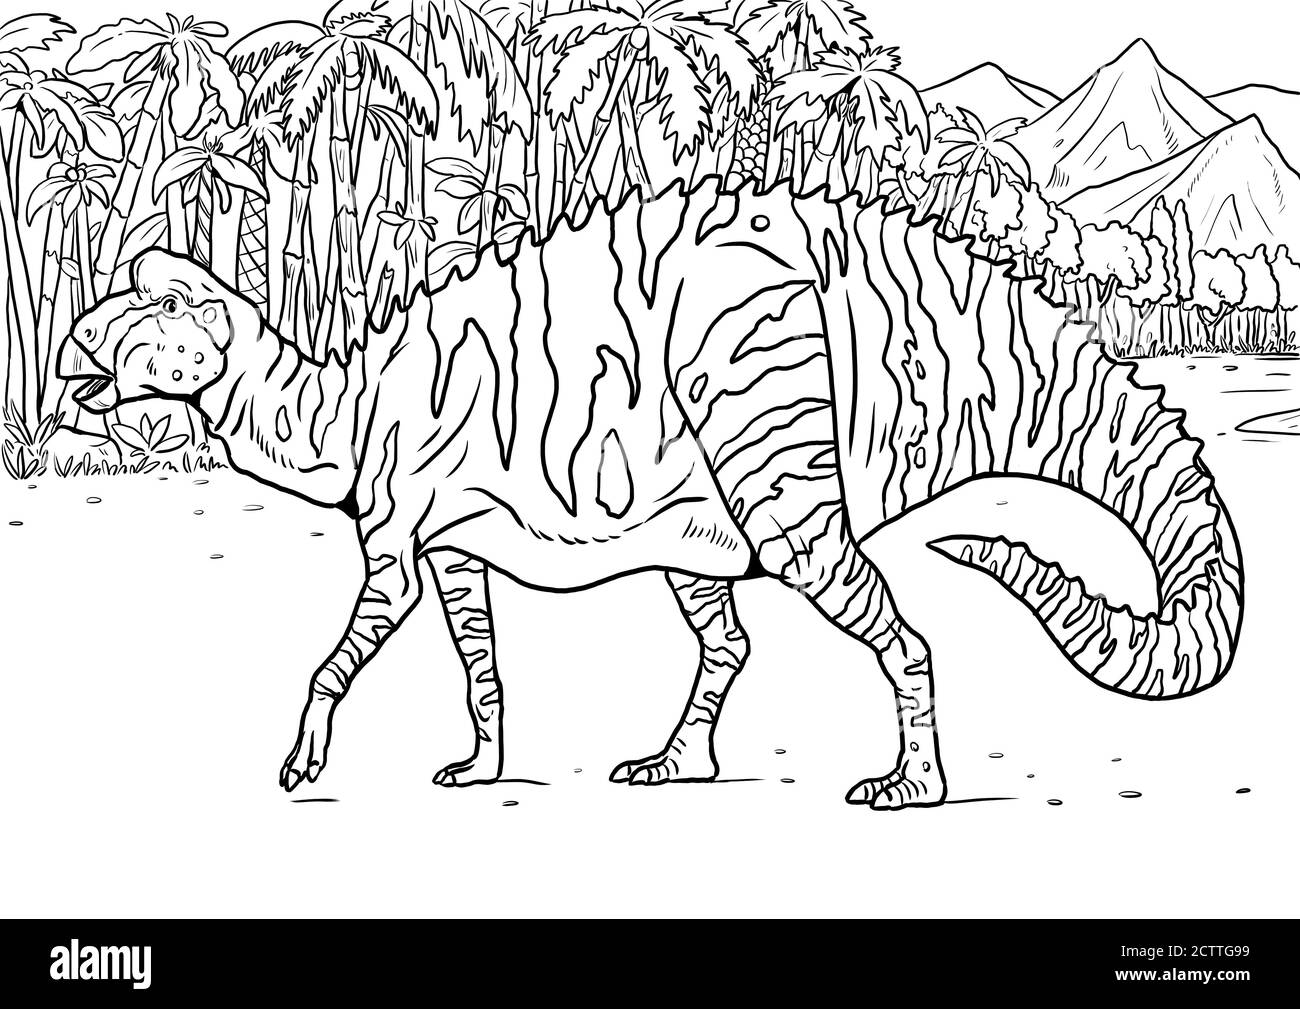 Dino Coloring Page High Resolution Stock Photography and Images ...